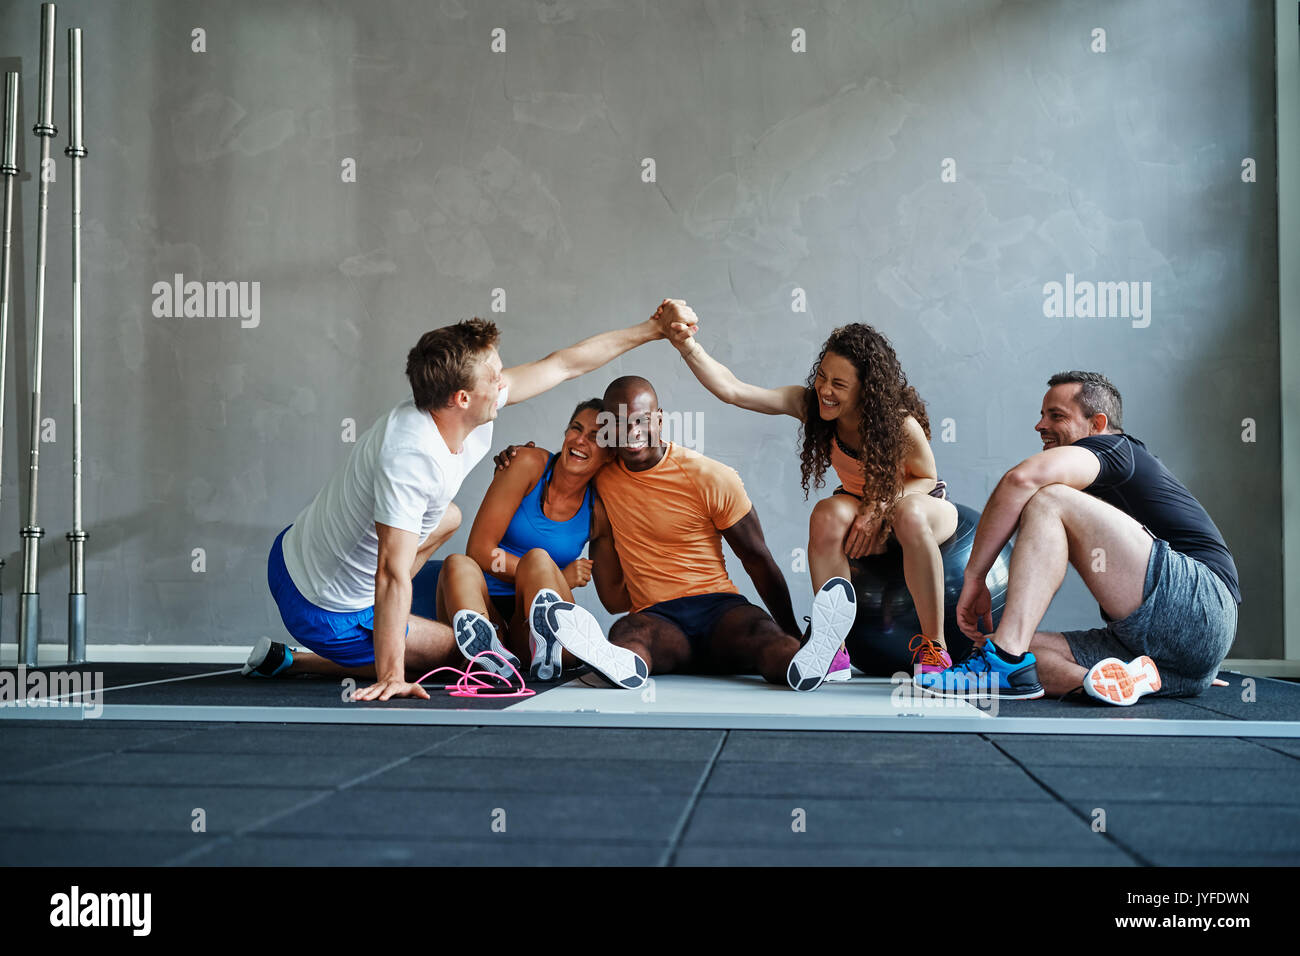 Two friends in sportswear high fiving each other while sitting on the floor of a gym talking with friends after a workout Stock Photo